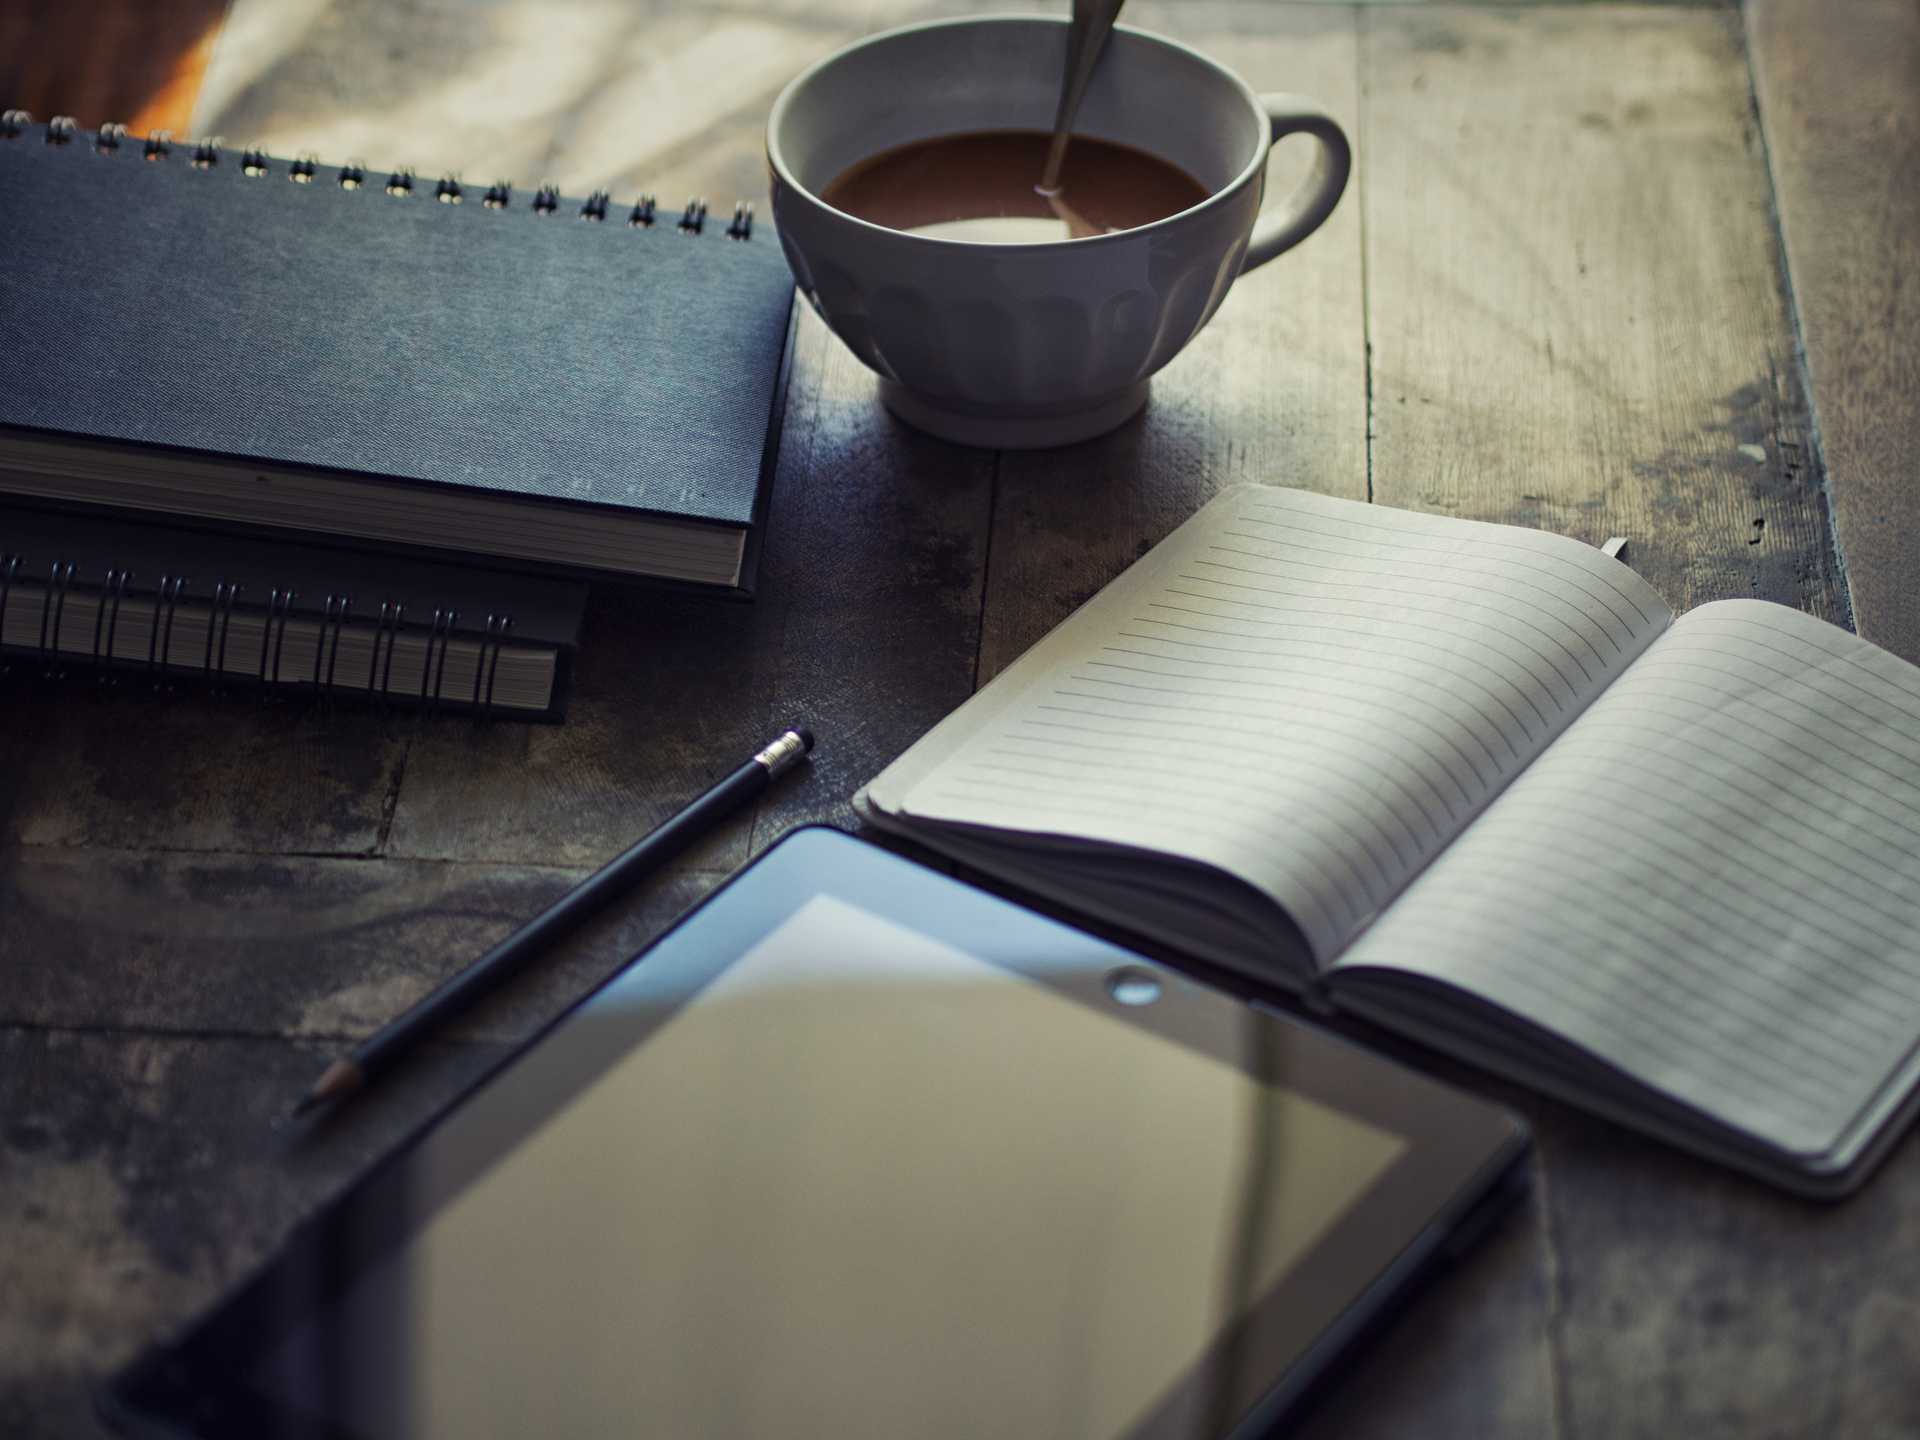 Cup Filled With Coffee Near Notebook and Tablet